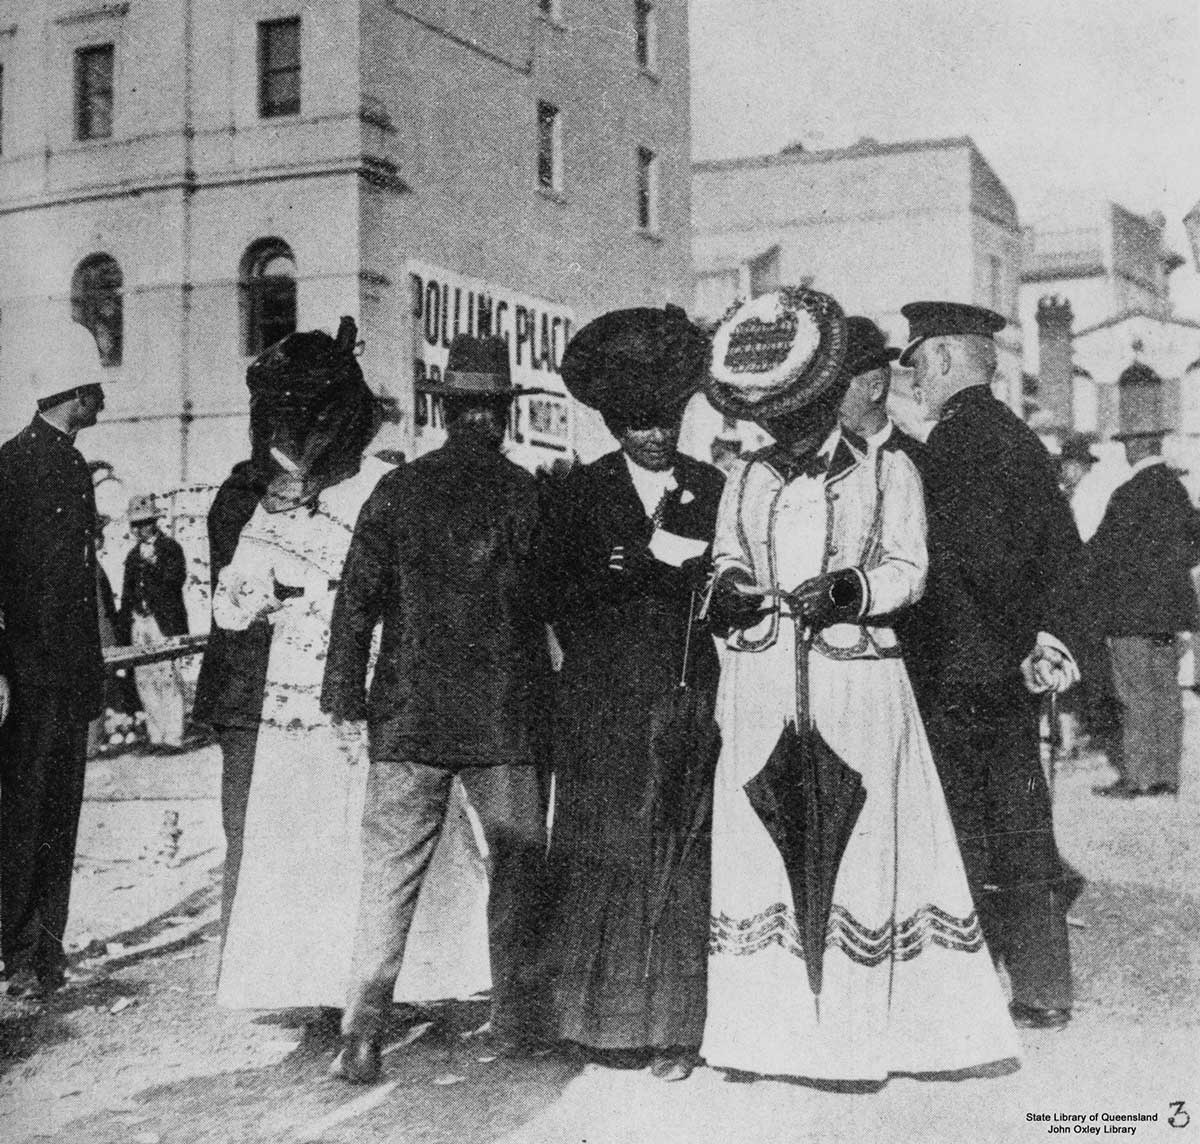 Two women in period clothing standing in a street amongst other people. They are looking at small slips of paper.